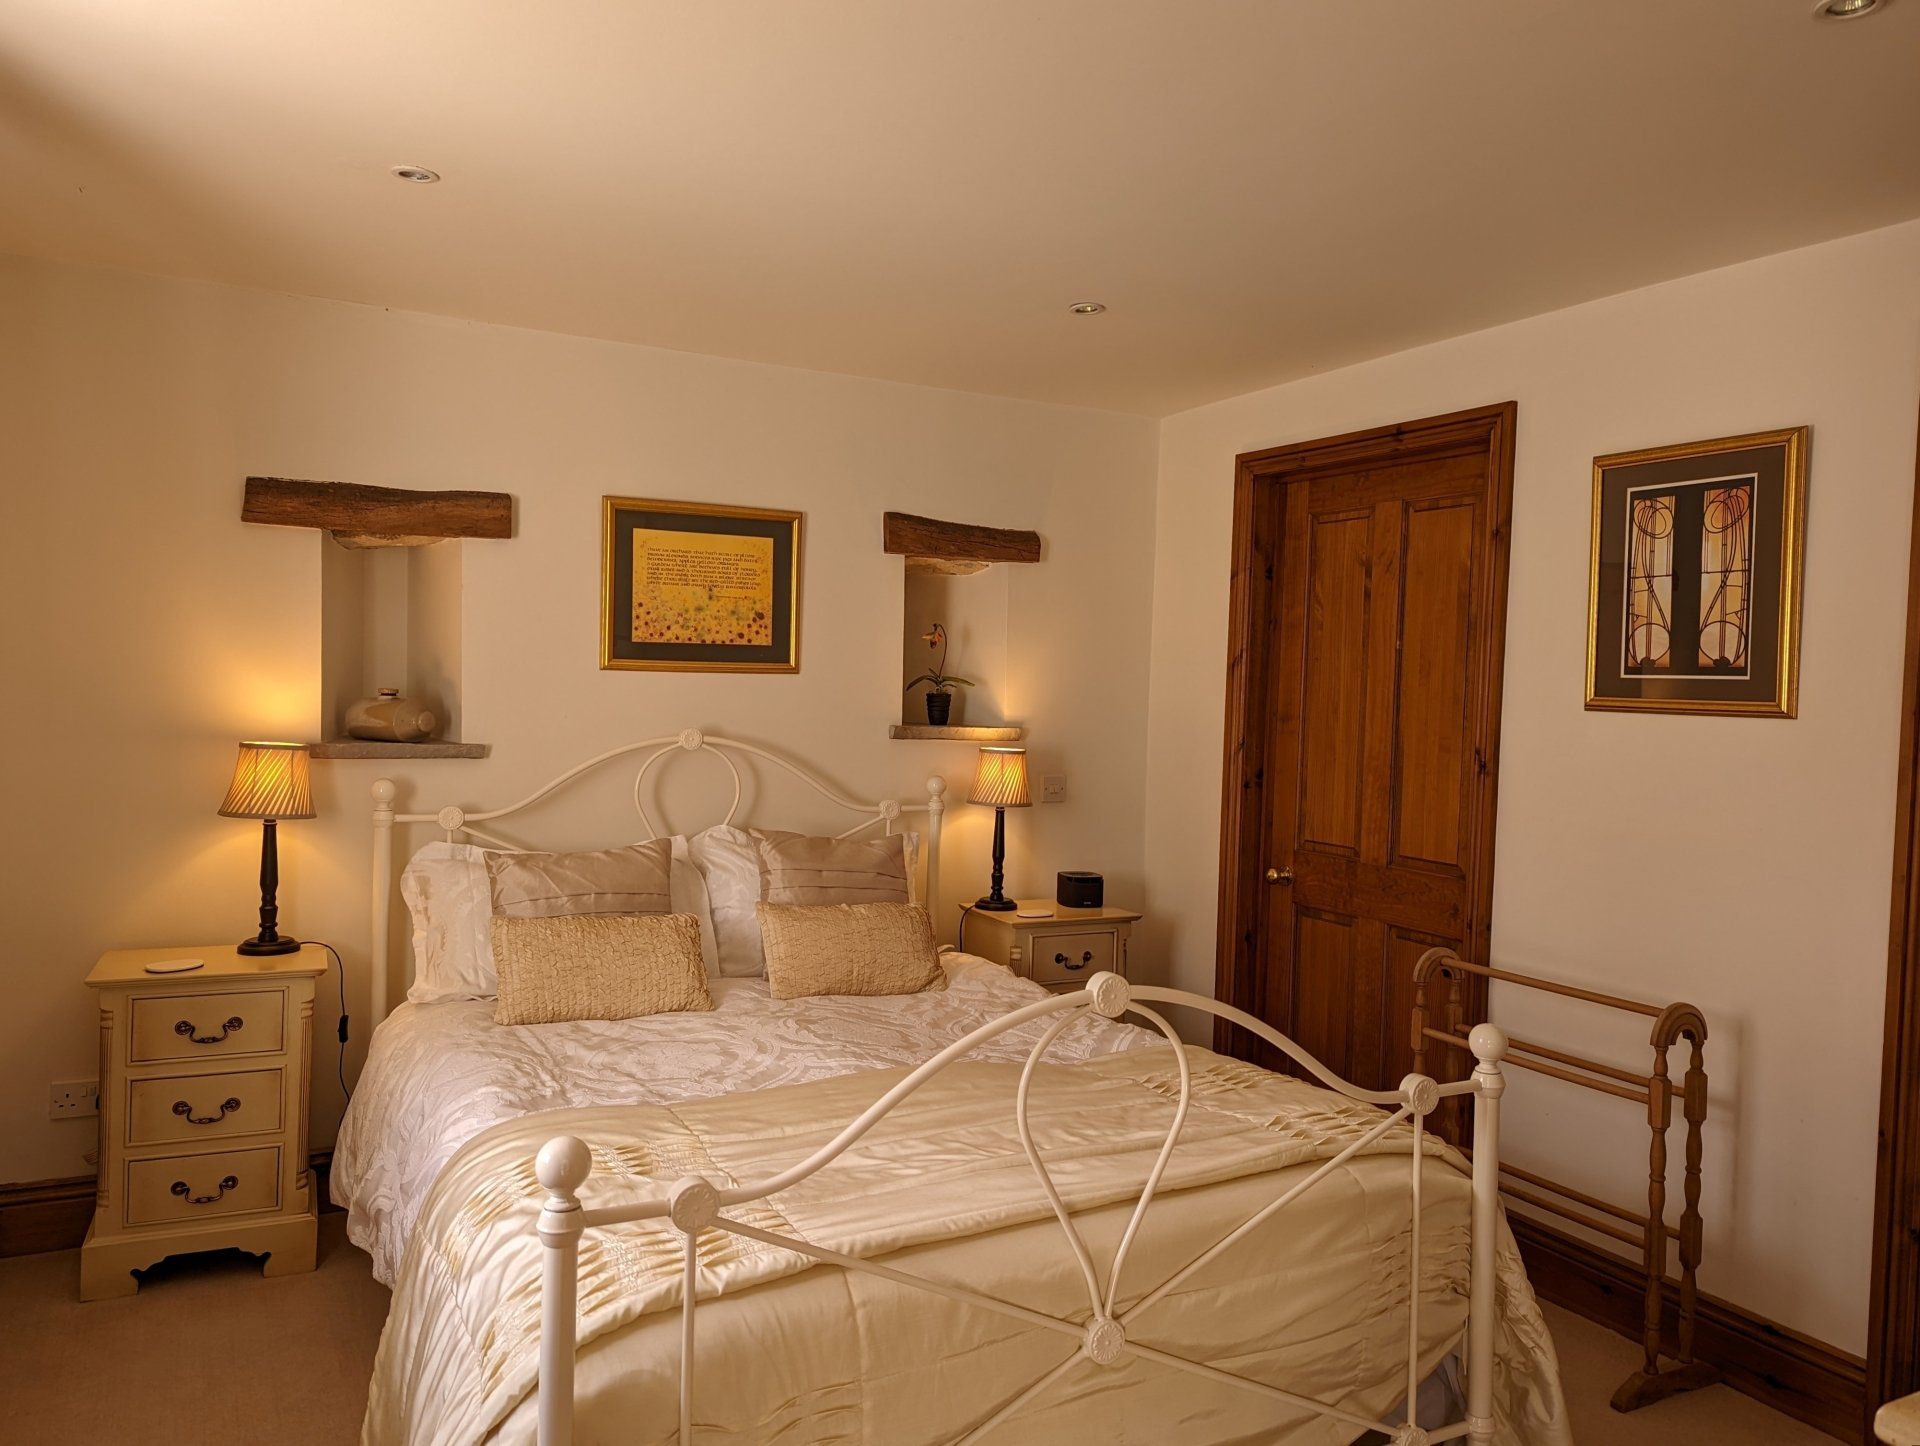 Loand House Court, Cruck Cottage, Kingsize Bed, Walk in Wardrobe